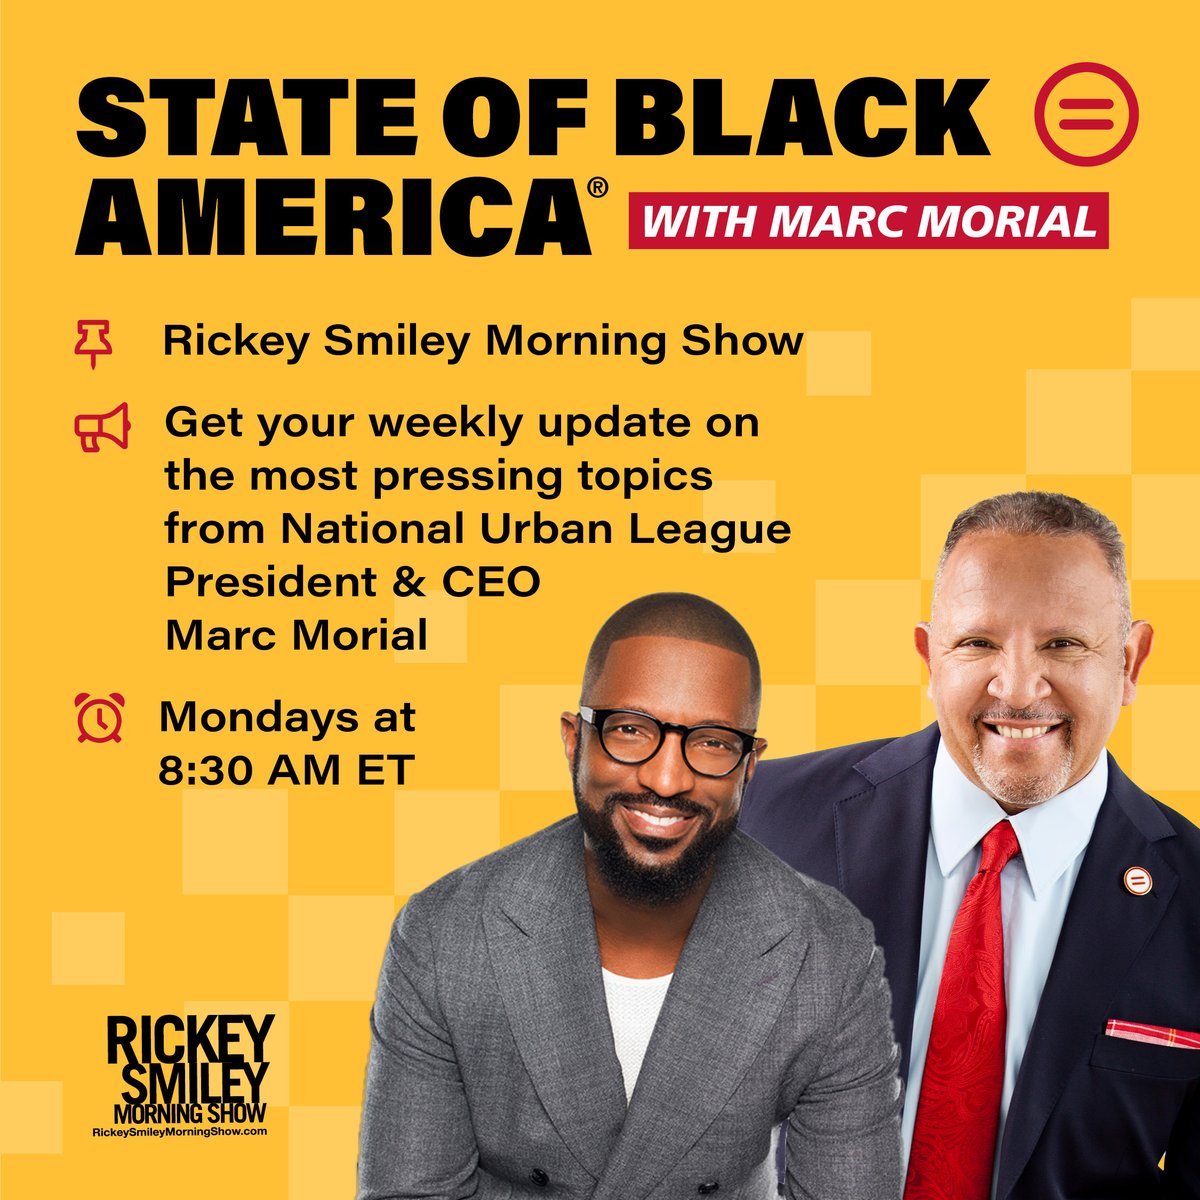 Kick your Monday morning off with @MarcMorial's State of Black America segment on @TheRSMS at 8:30 AM ET. 🎧 Find your local station: rickeysmileymorningshow.com/affiliates.